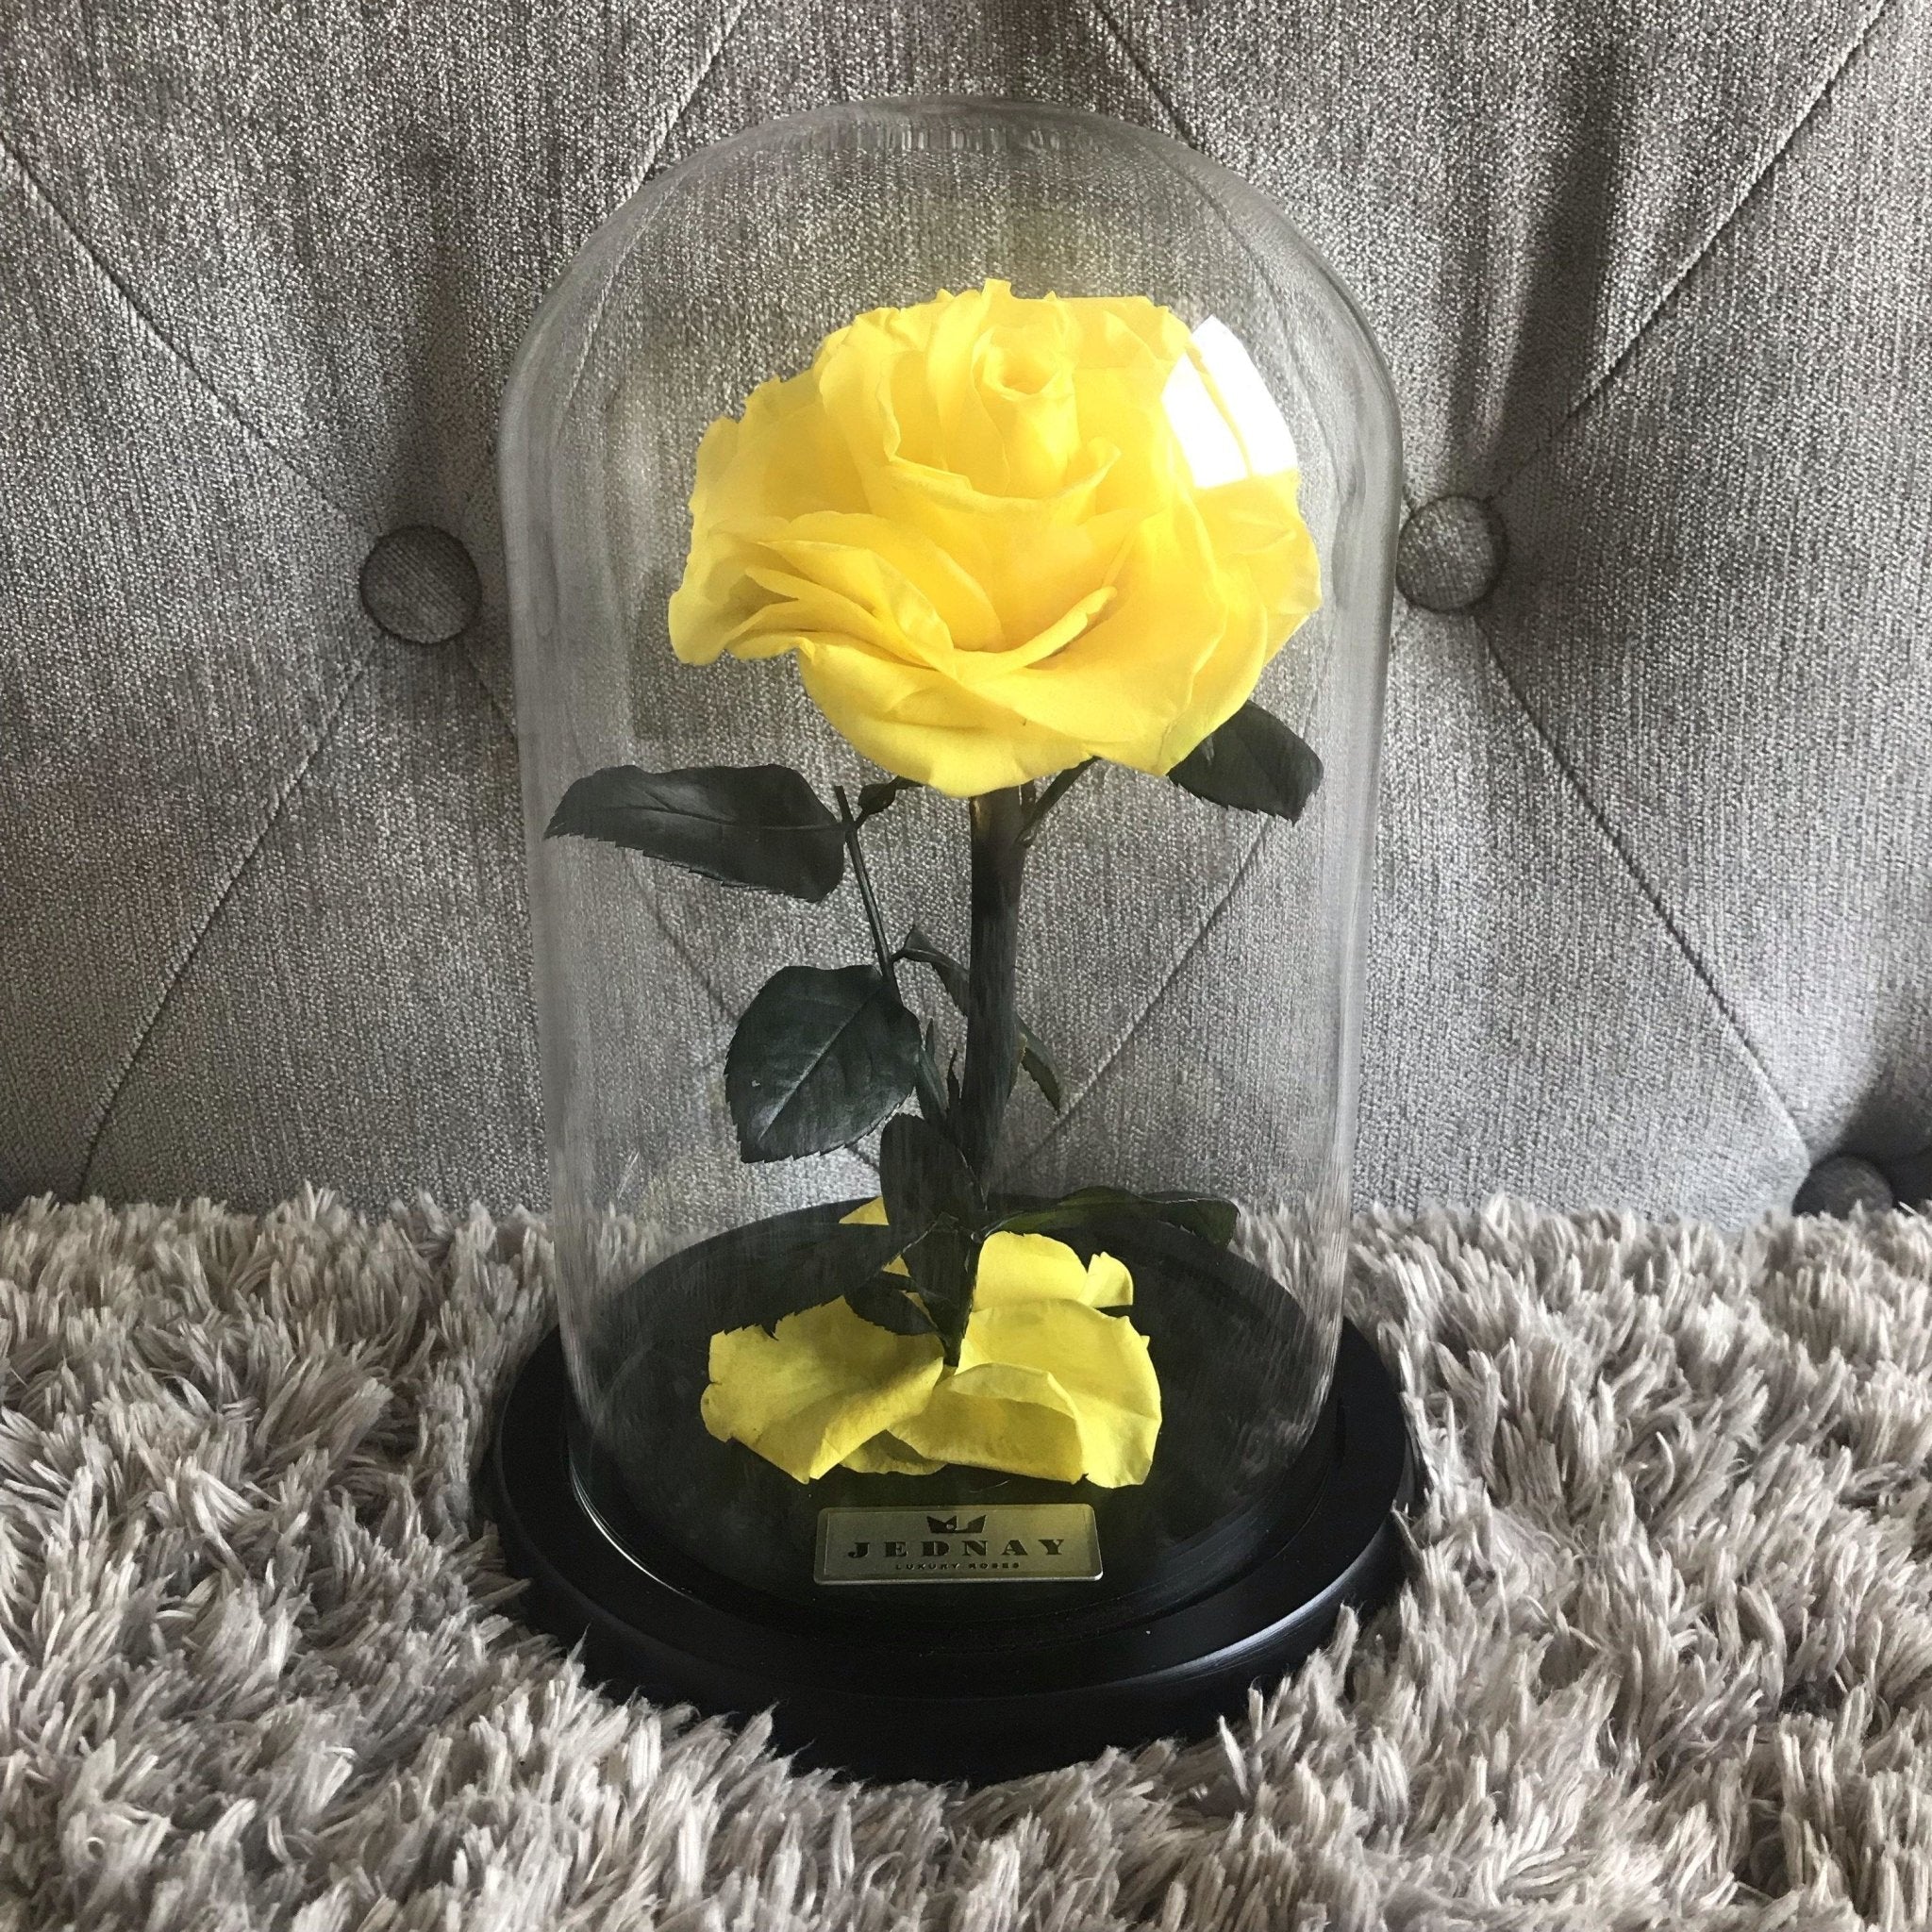 The Belle by Jednay® Sunshine Yellow Infinity Rose - Jednay Roses